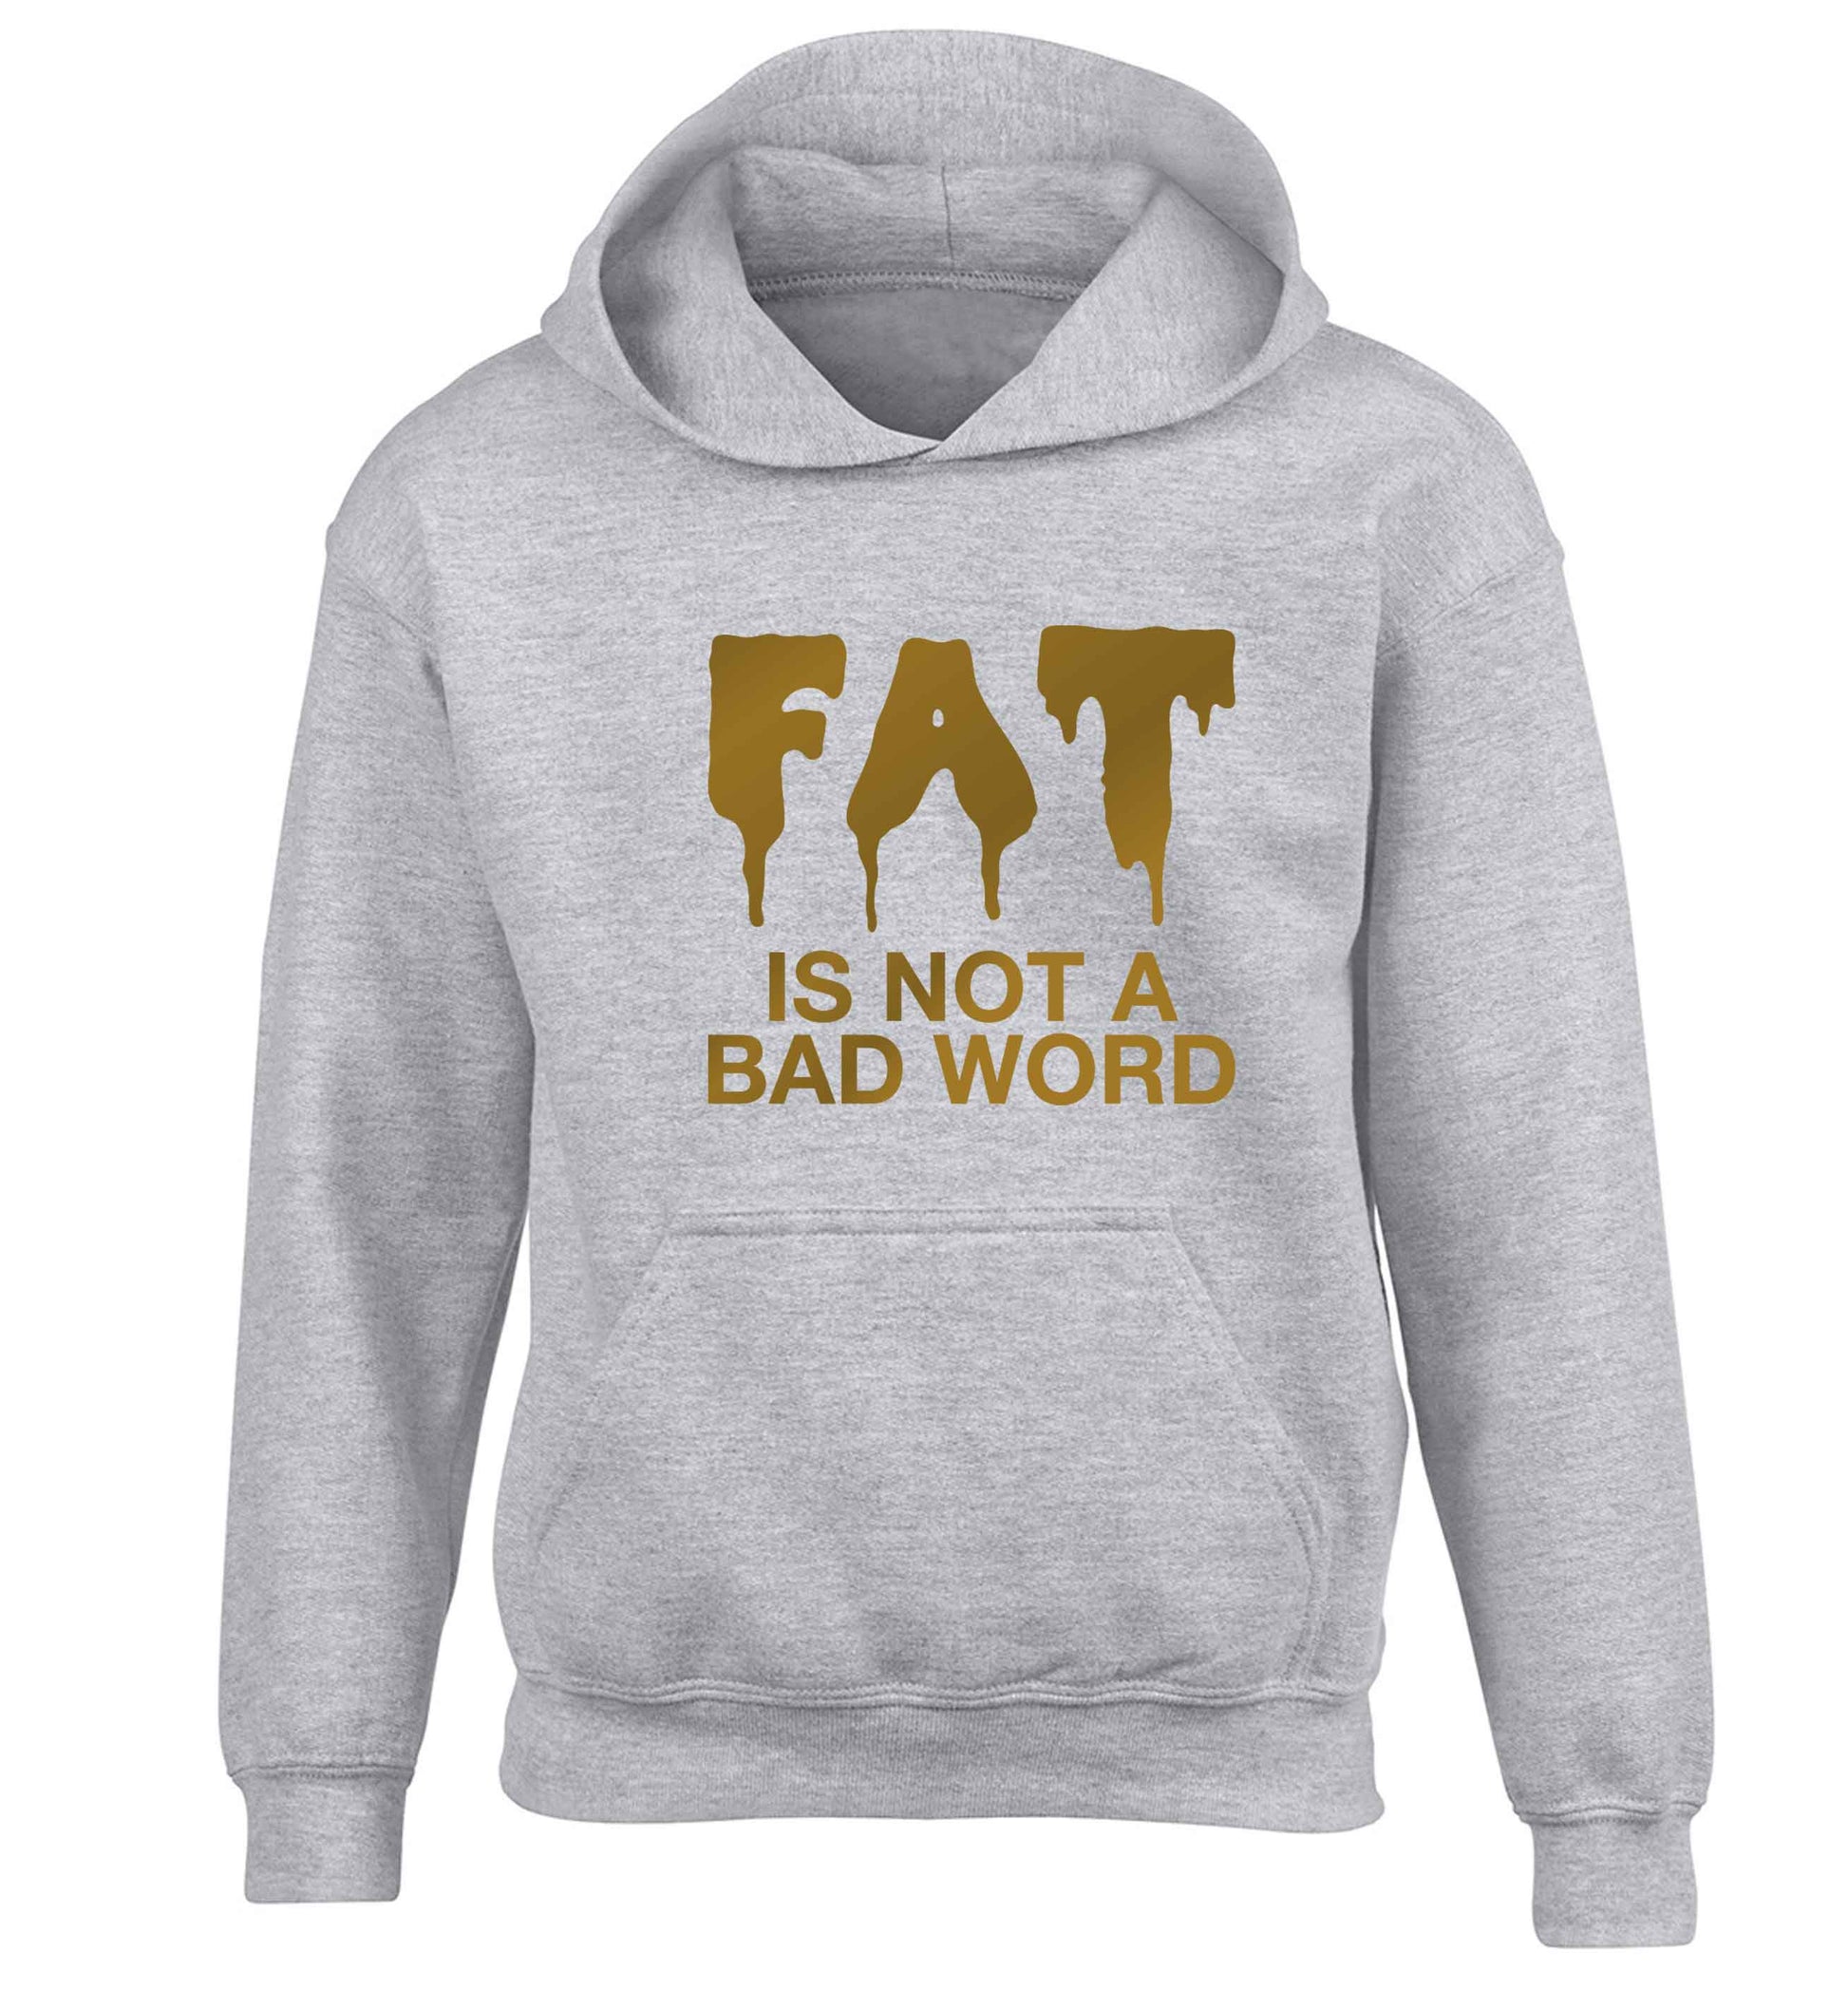 Fat is not a bad word children's grey hoodie 12-13 Years